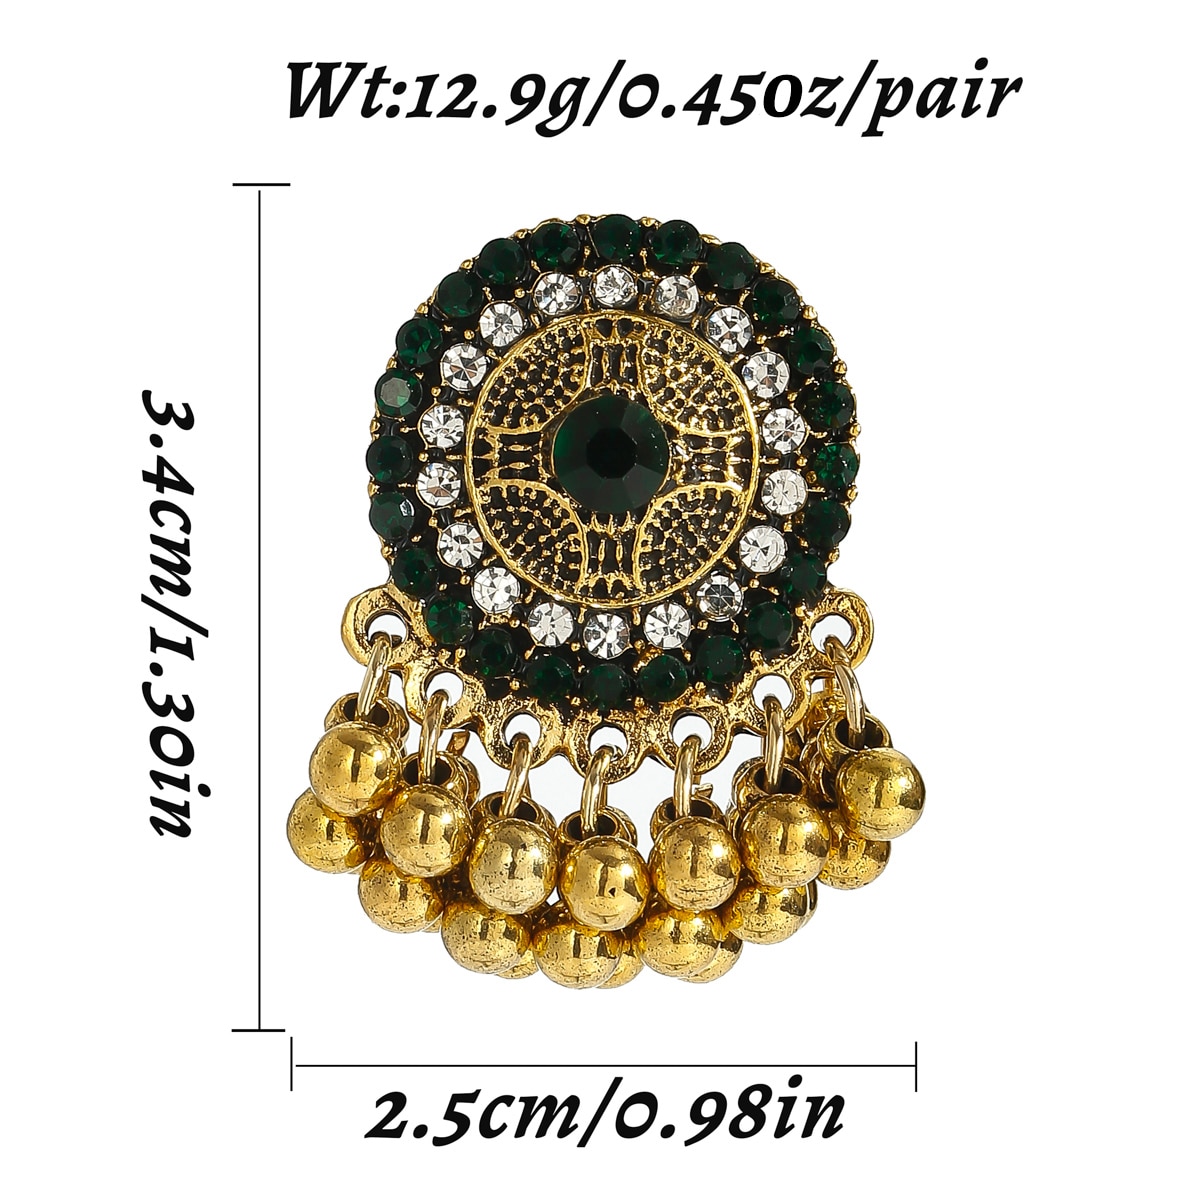 Classic-Ethnic-CZ-Indian-Earrings-For-Women-Gypsy-Round-Alloy-Jhumka-Earring-Fashion-Jewelry-Orecchi-3256804584391767-7